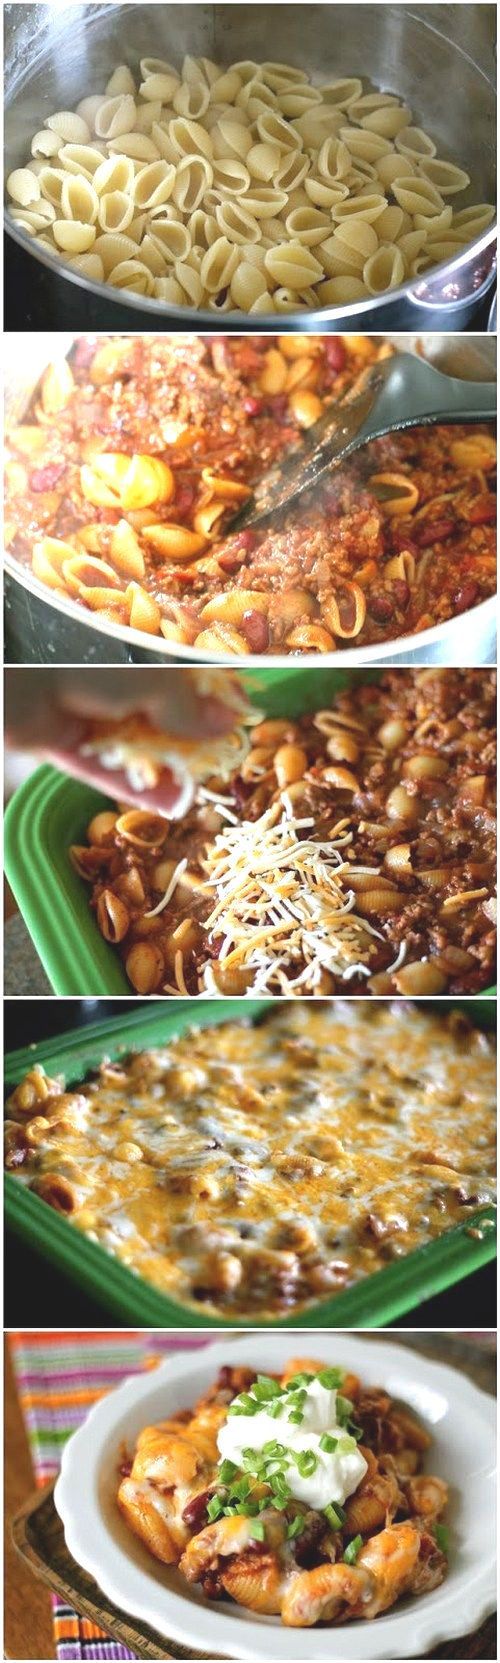 Chili Pasta Bake // Perfect for Dinner Dish for Chilly Weather